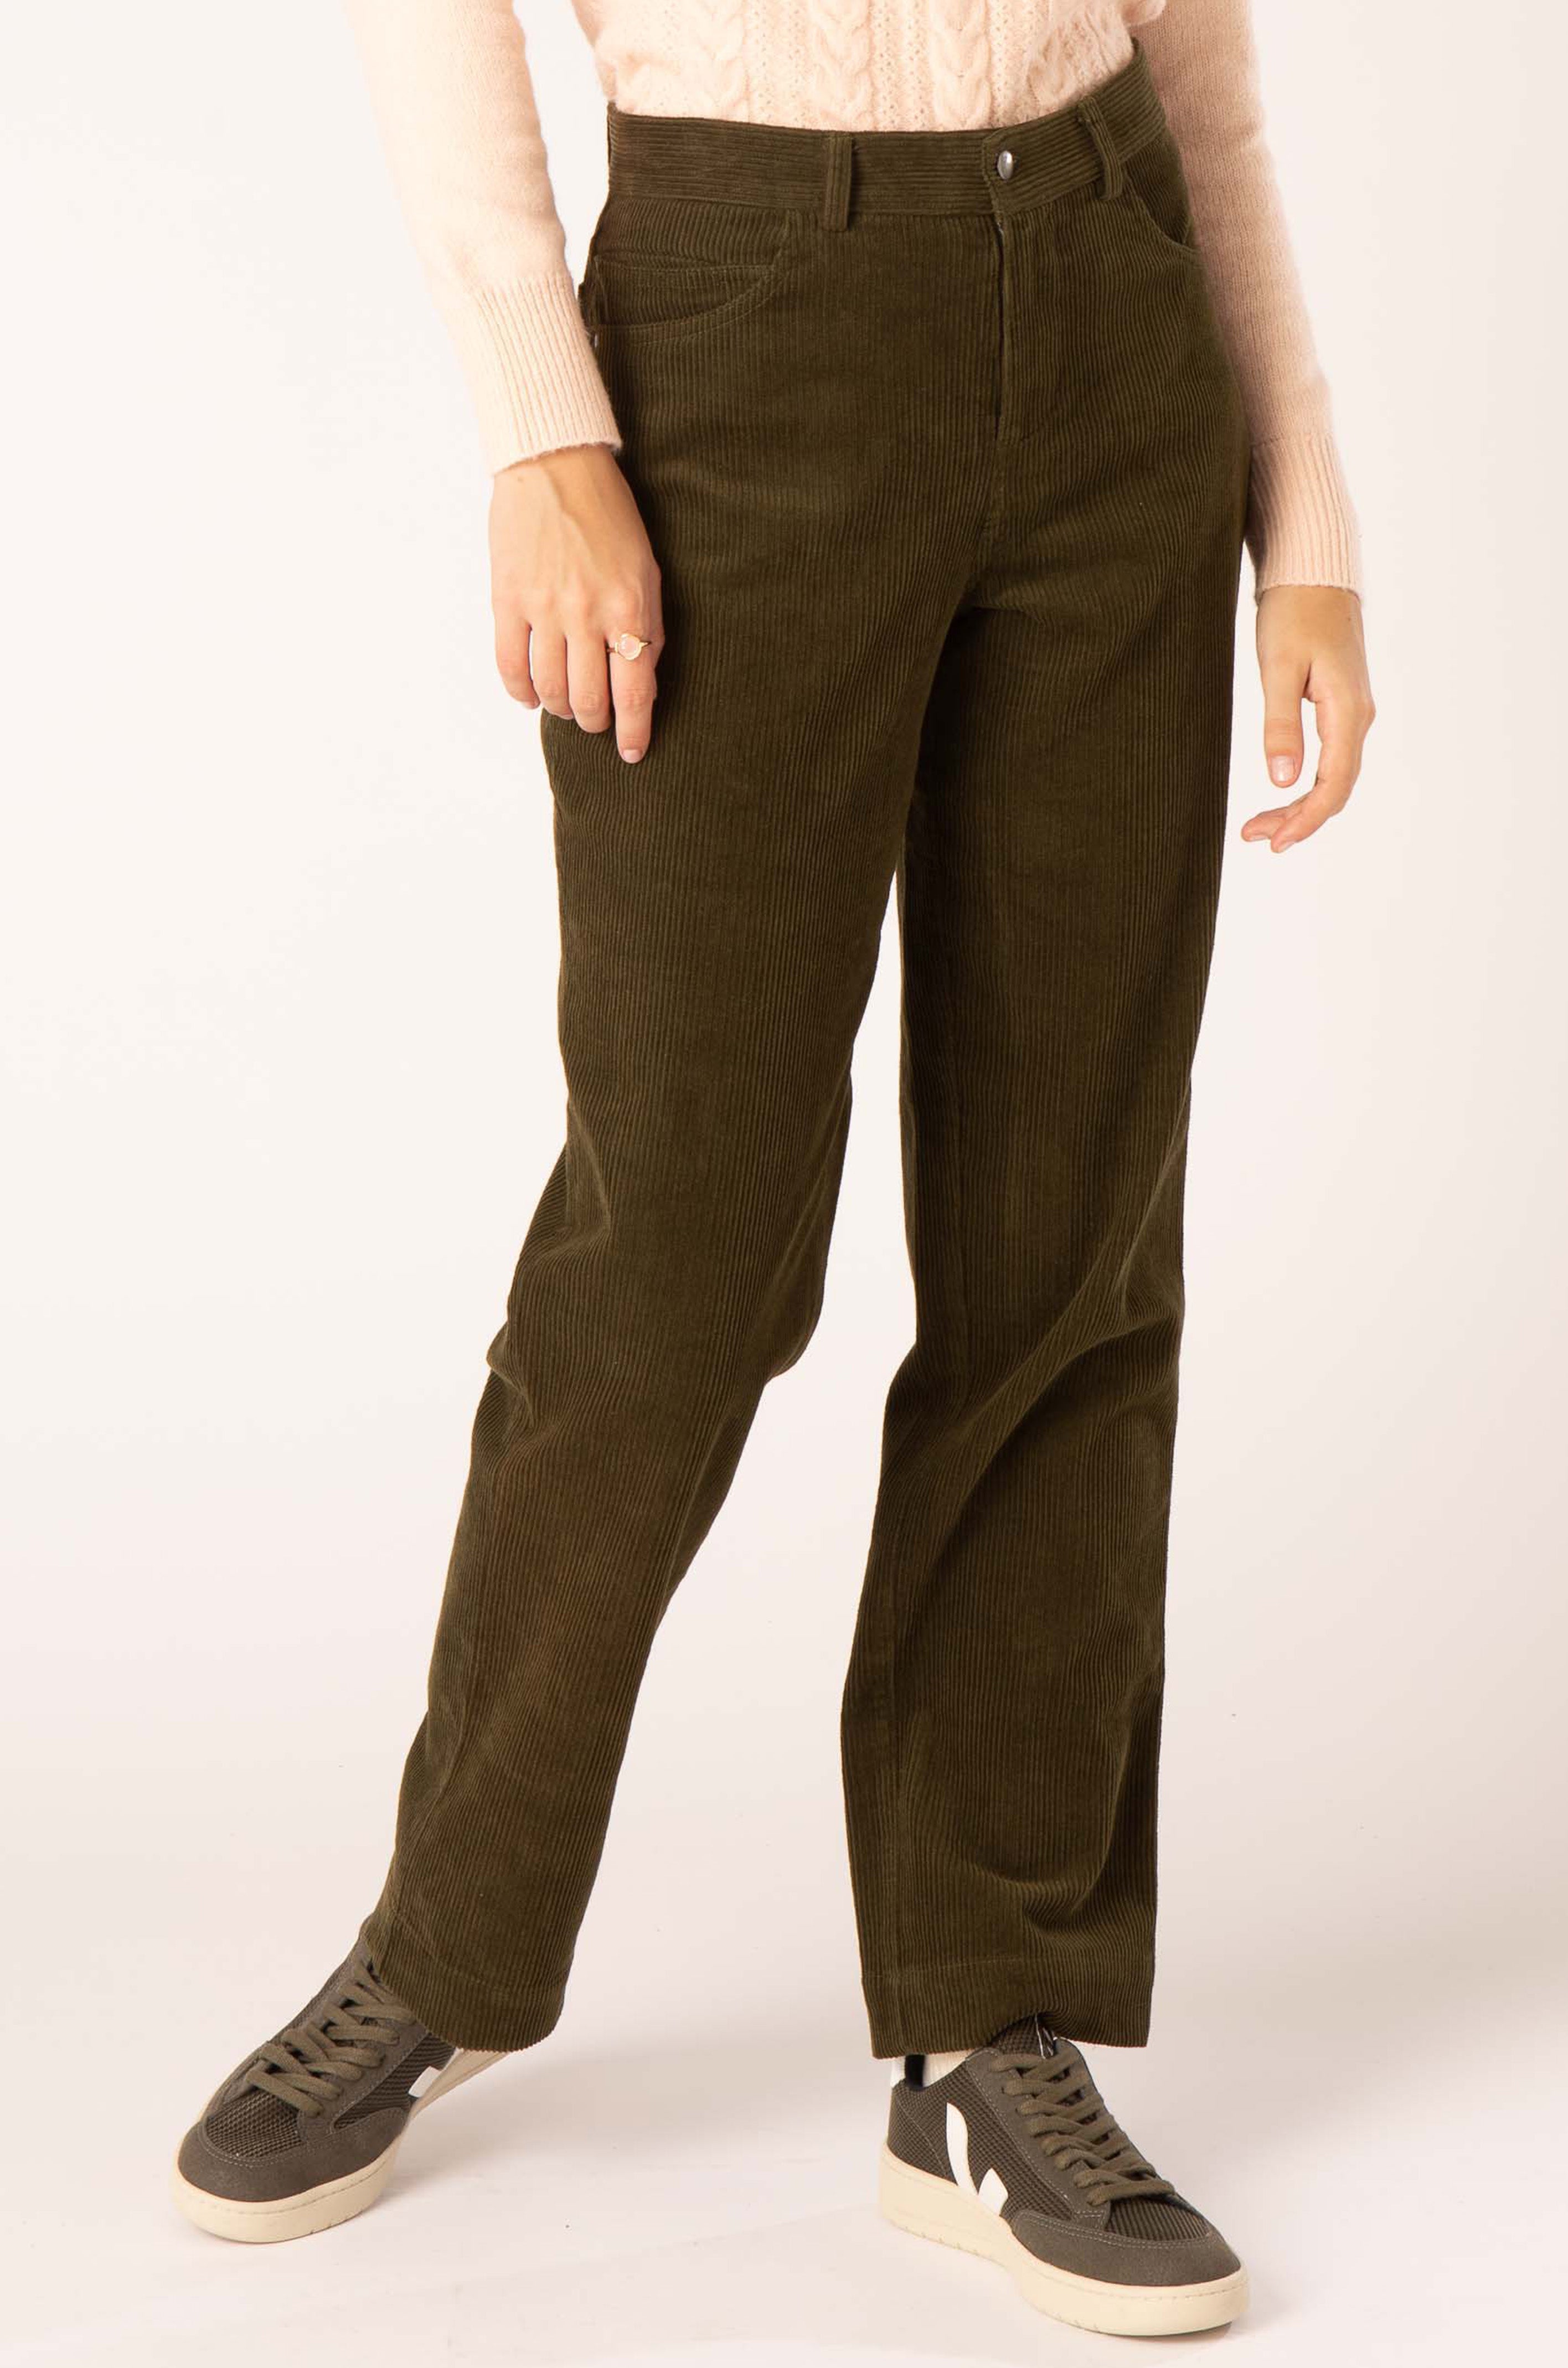 Cord Trouser in Military Olive, Military Olive / 8